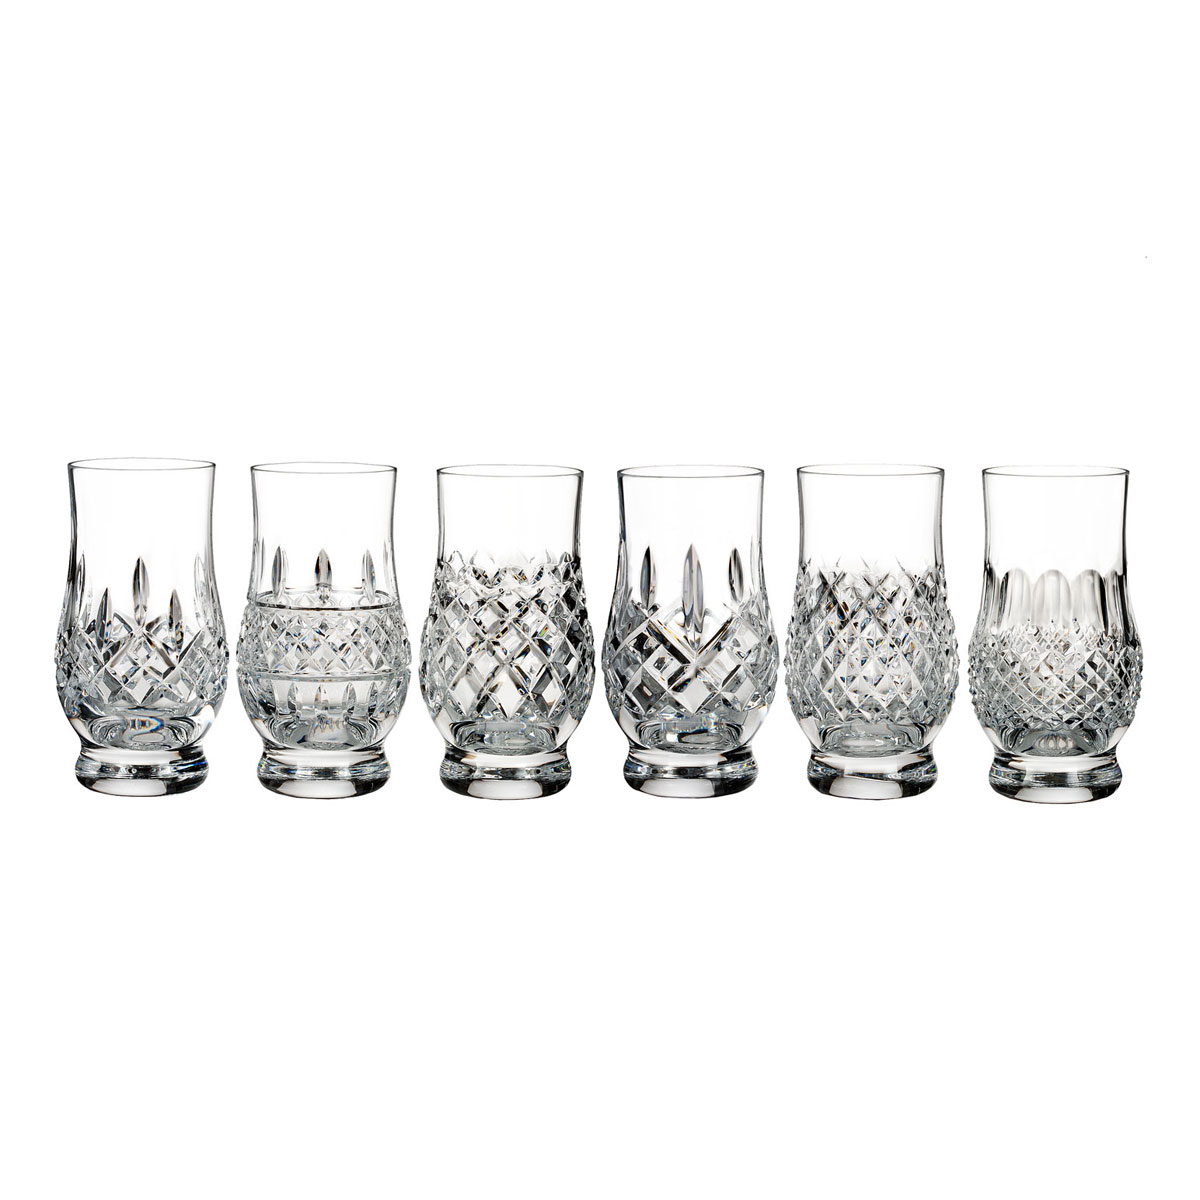 Waterford Crystal, Lismore Connoisseur Heritage Footed Tasting Tumbler, Set of Six